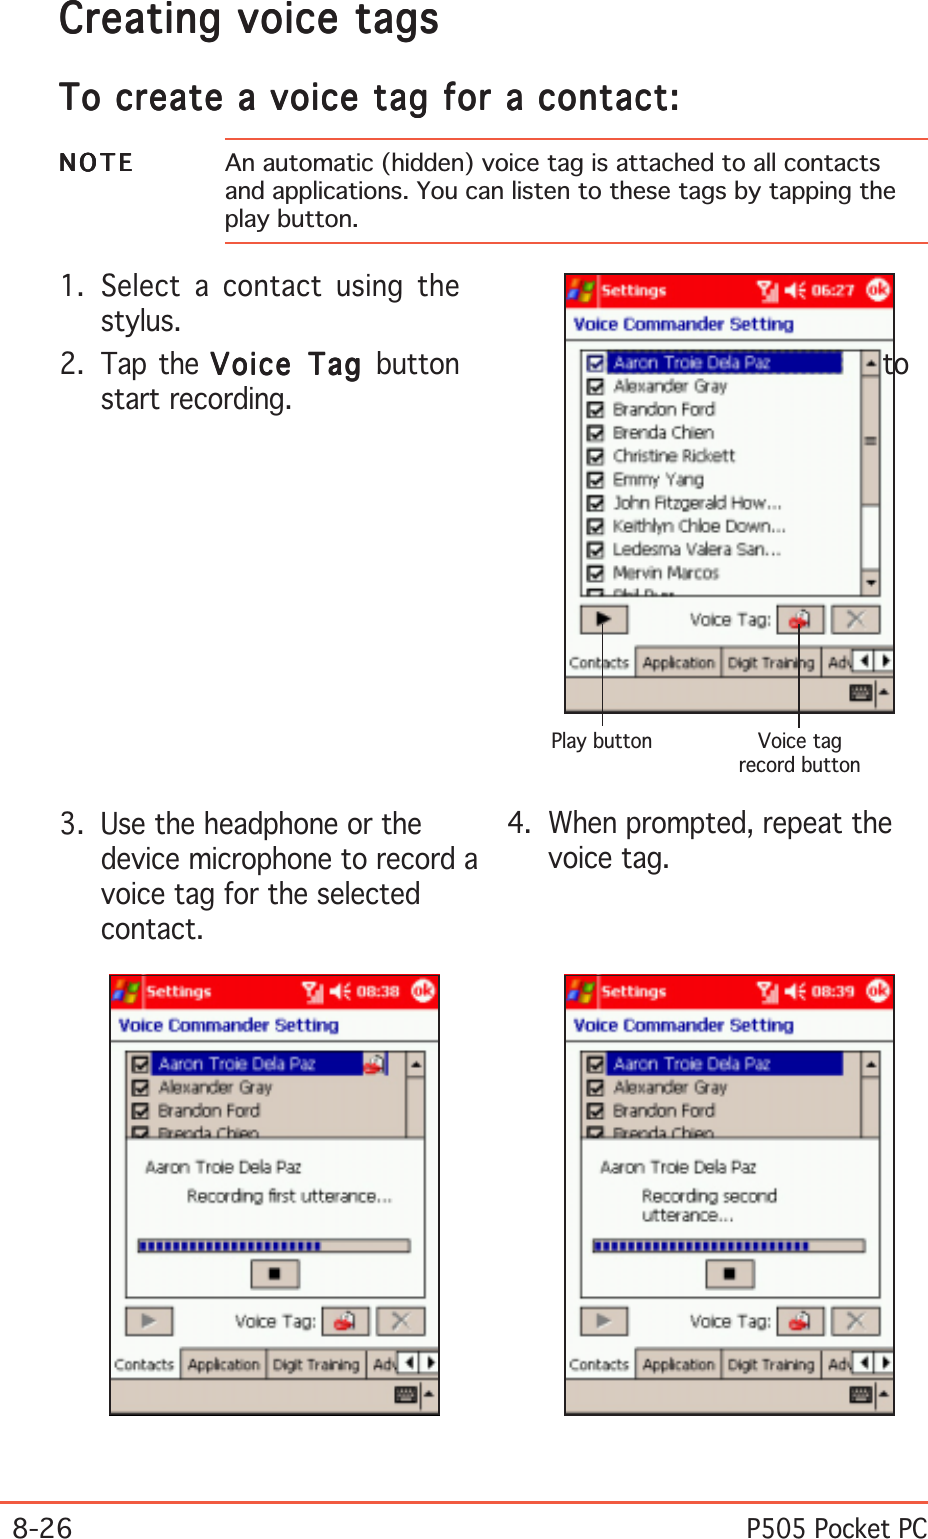 8-26P505 Pocket PC4. When prompted, repeat thevoice tag.3. Use the headphone or thedevice microphone to record avoice tag for the selectedcontact.NOTENOTENOTENOTEN O T E An automatic (hidden) voice tag is attached to all contactsand applications. You can listen to these tags by tapping theplay button.1. Select a contact using thestylus.2. Tap the Voice Tag Voice Tag Voice Tag Voice Tag Voice Tag button tostart recording.Creating voice tagsCreating voice tagsCreating voice tagsCreating voice tagsCreating voice tagsTo create a voice tag for a contact:To create a voice tag for a contact:To create a voice tag for a contact:To create a voice tag for a contact:To create a voice tag for a contact:Voice tagrecord buttonPlay button